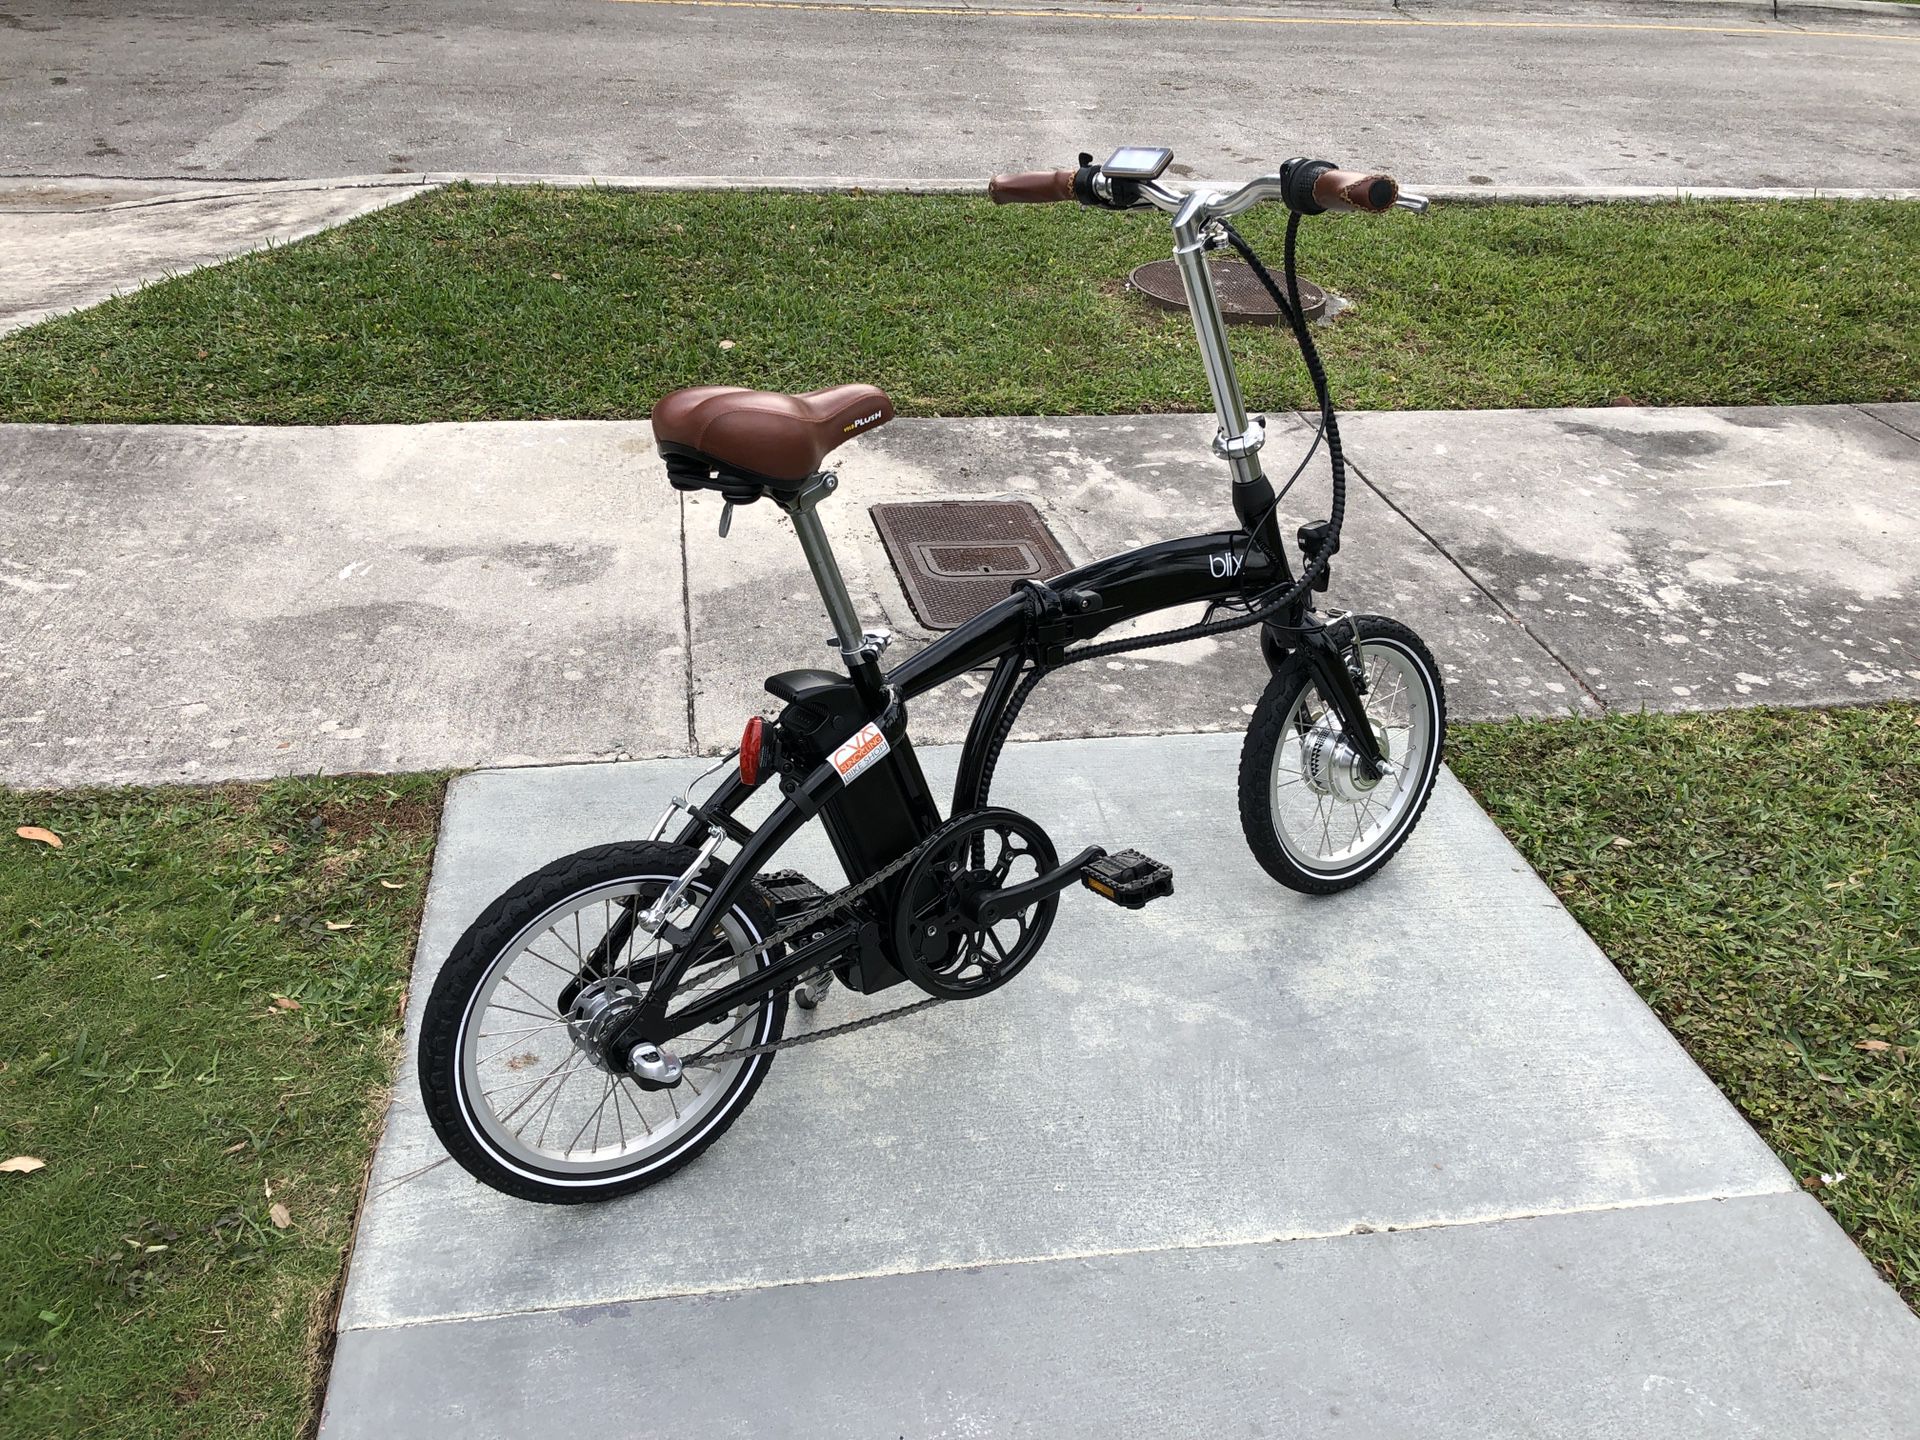 Blix folding ebike - as good as new. Only used for two or three times!